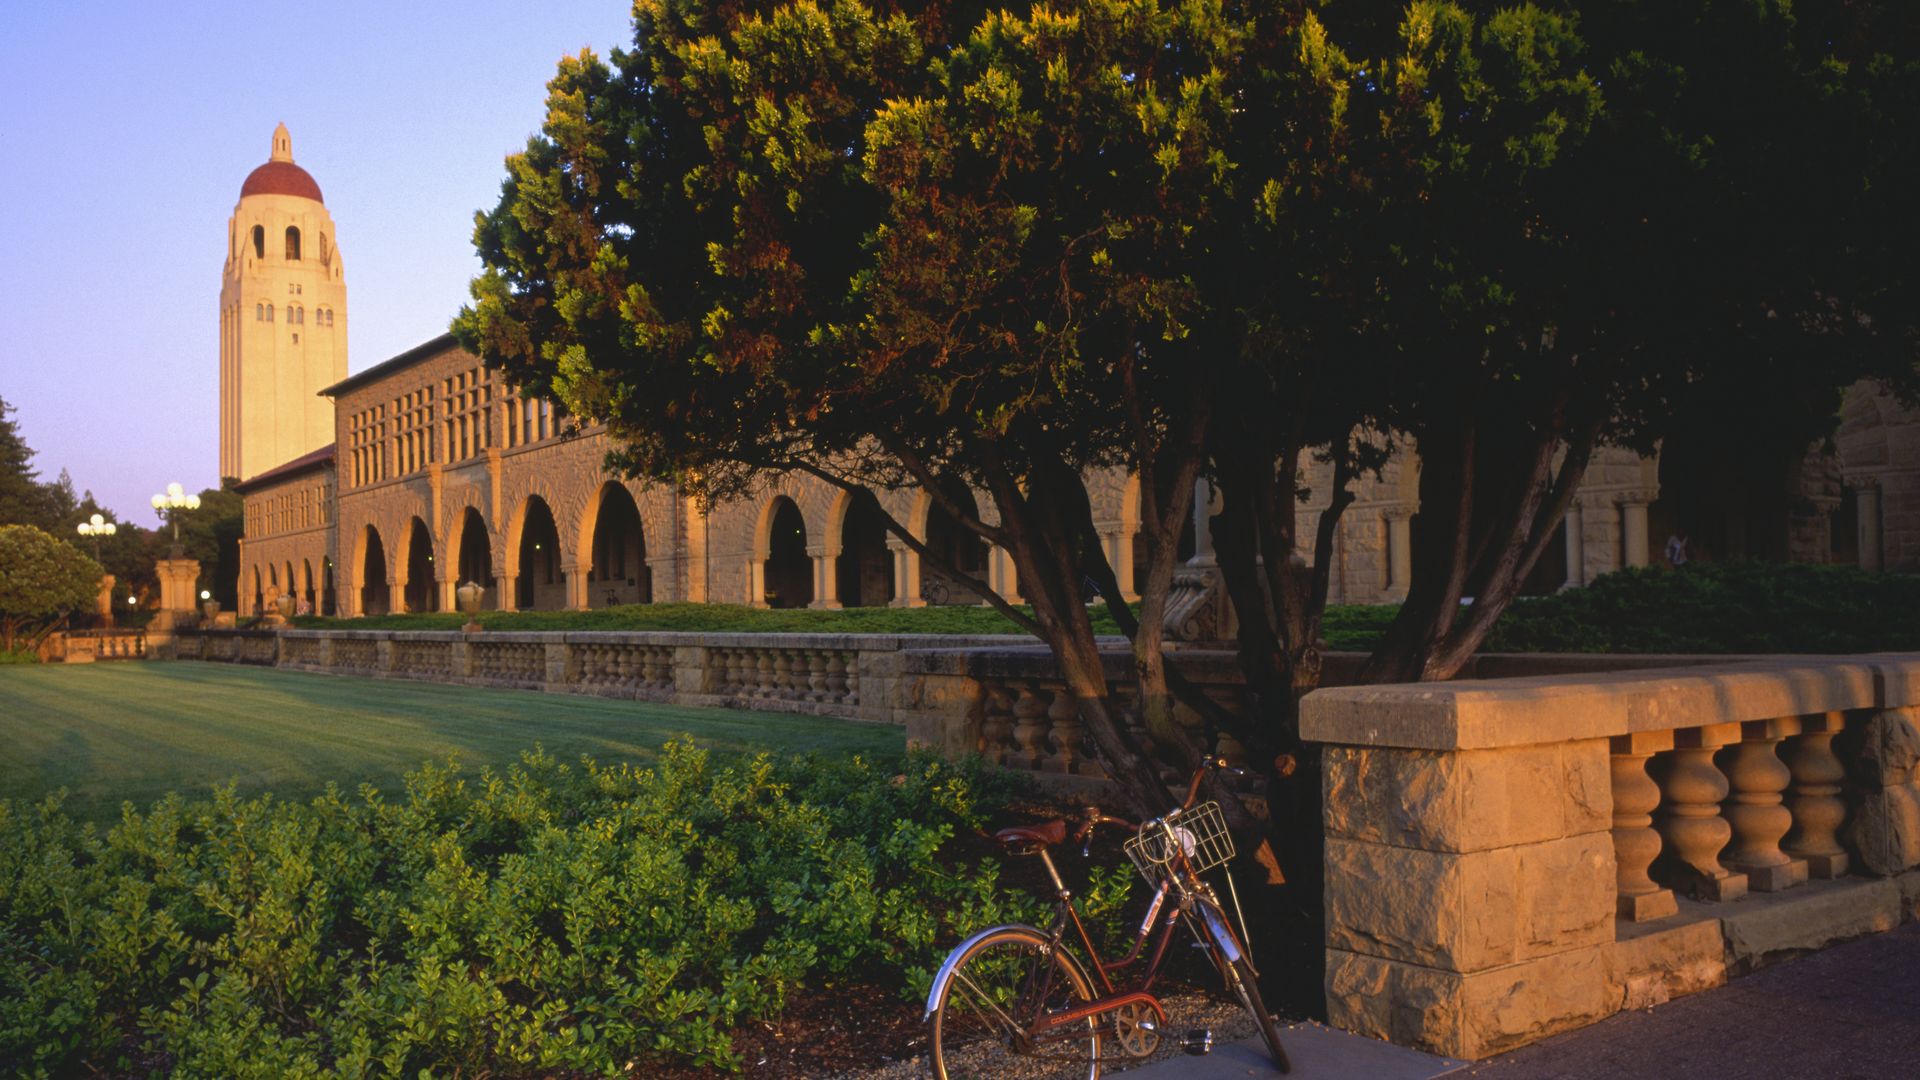 Exterior of building at Stanford University